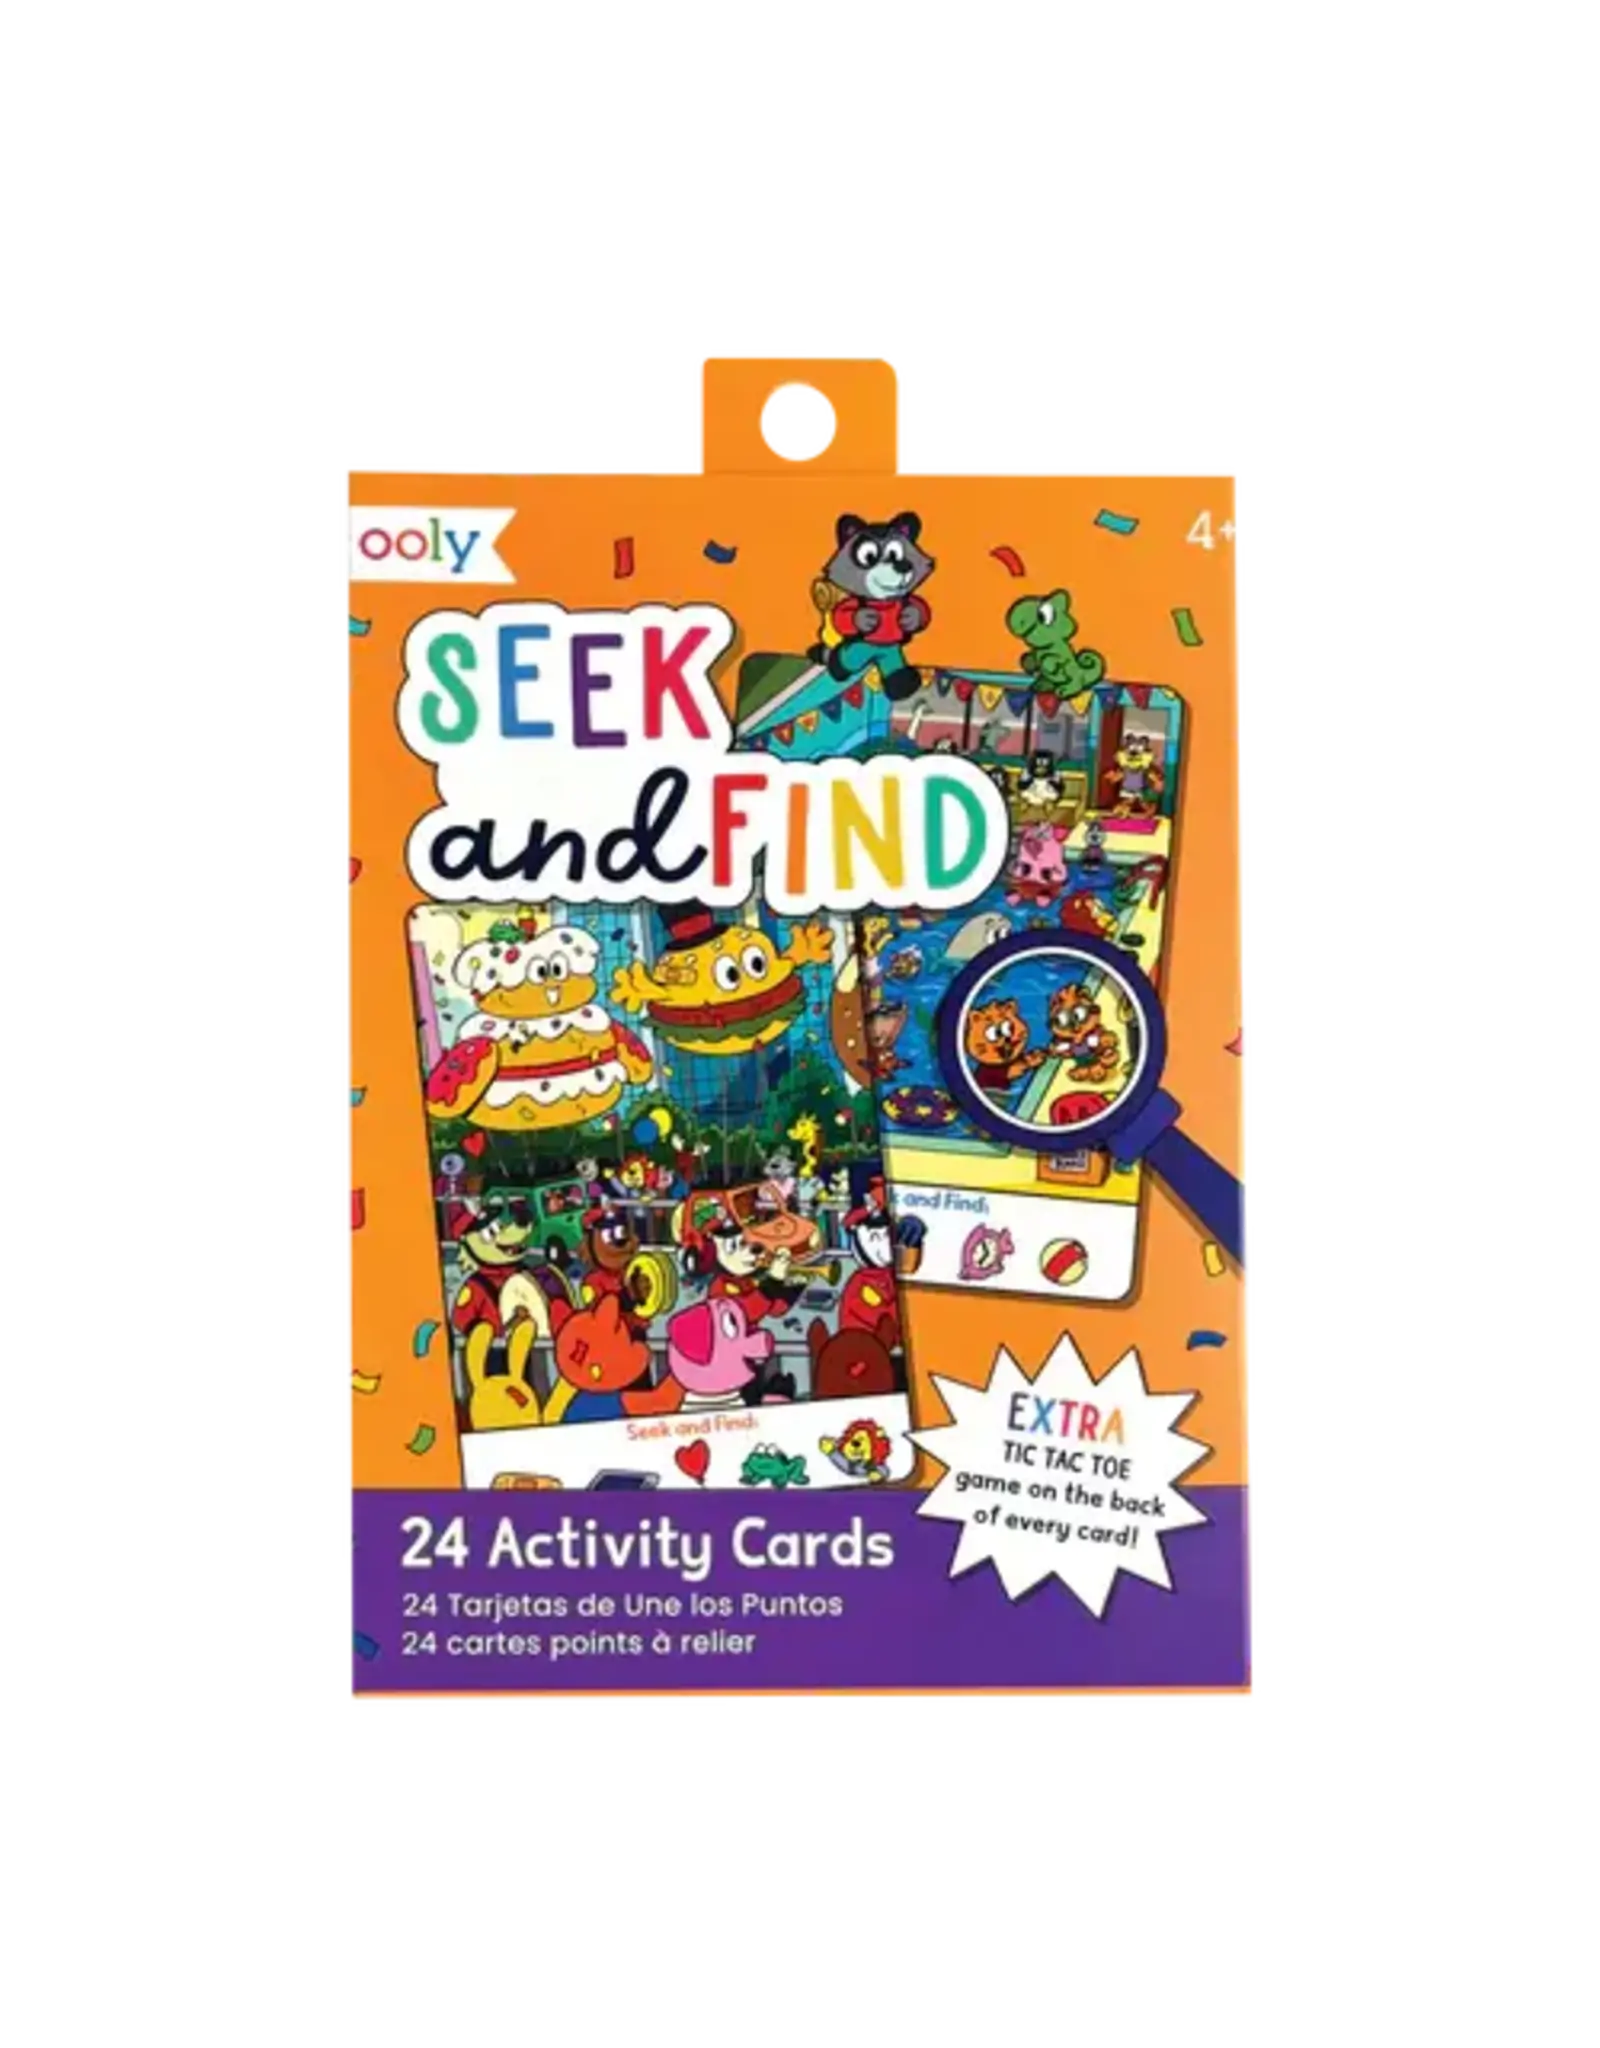 Ooly Seek And Find 24 Activity Cards